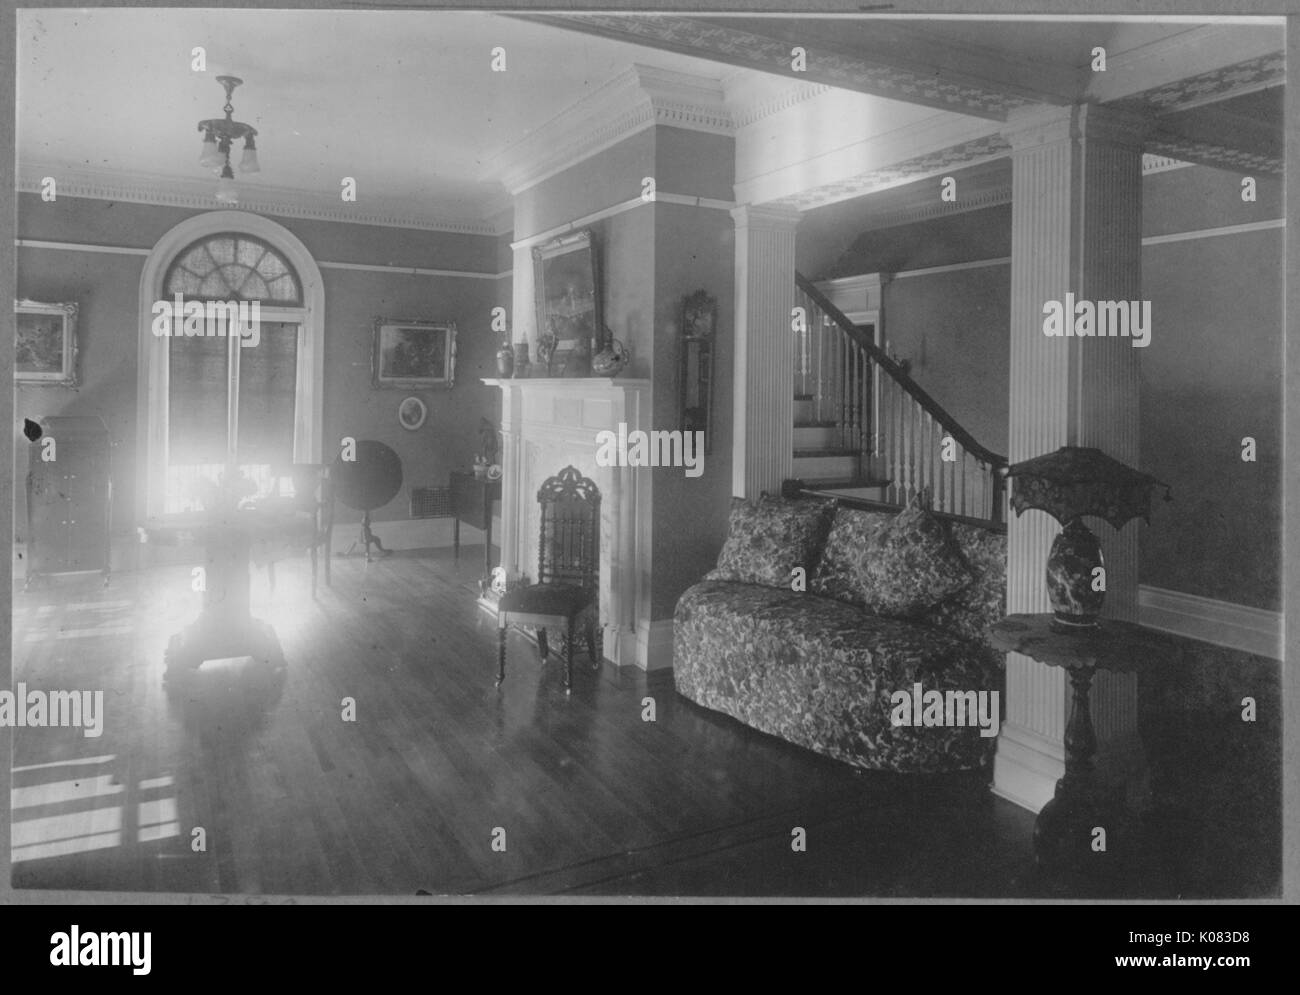 Sitting room of a house, wooden floors, small patterned couch, small decorative tables; Roland Park/Guilford, 1910. This image is from a series documenting the construction and sale of homes in the Roland Park/Guilford neighborhood of Baltimore, a streetcar suburb and one of the first planned communities in the United States. Stock Photo